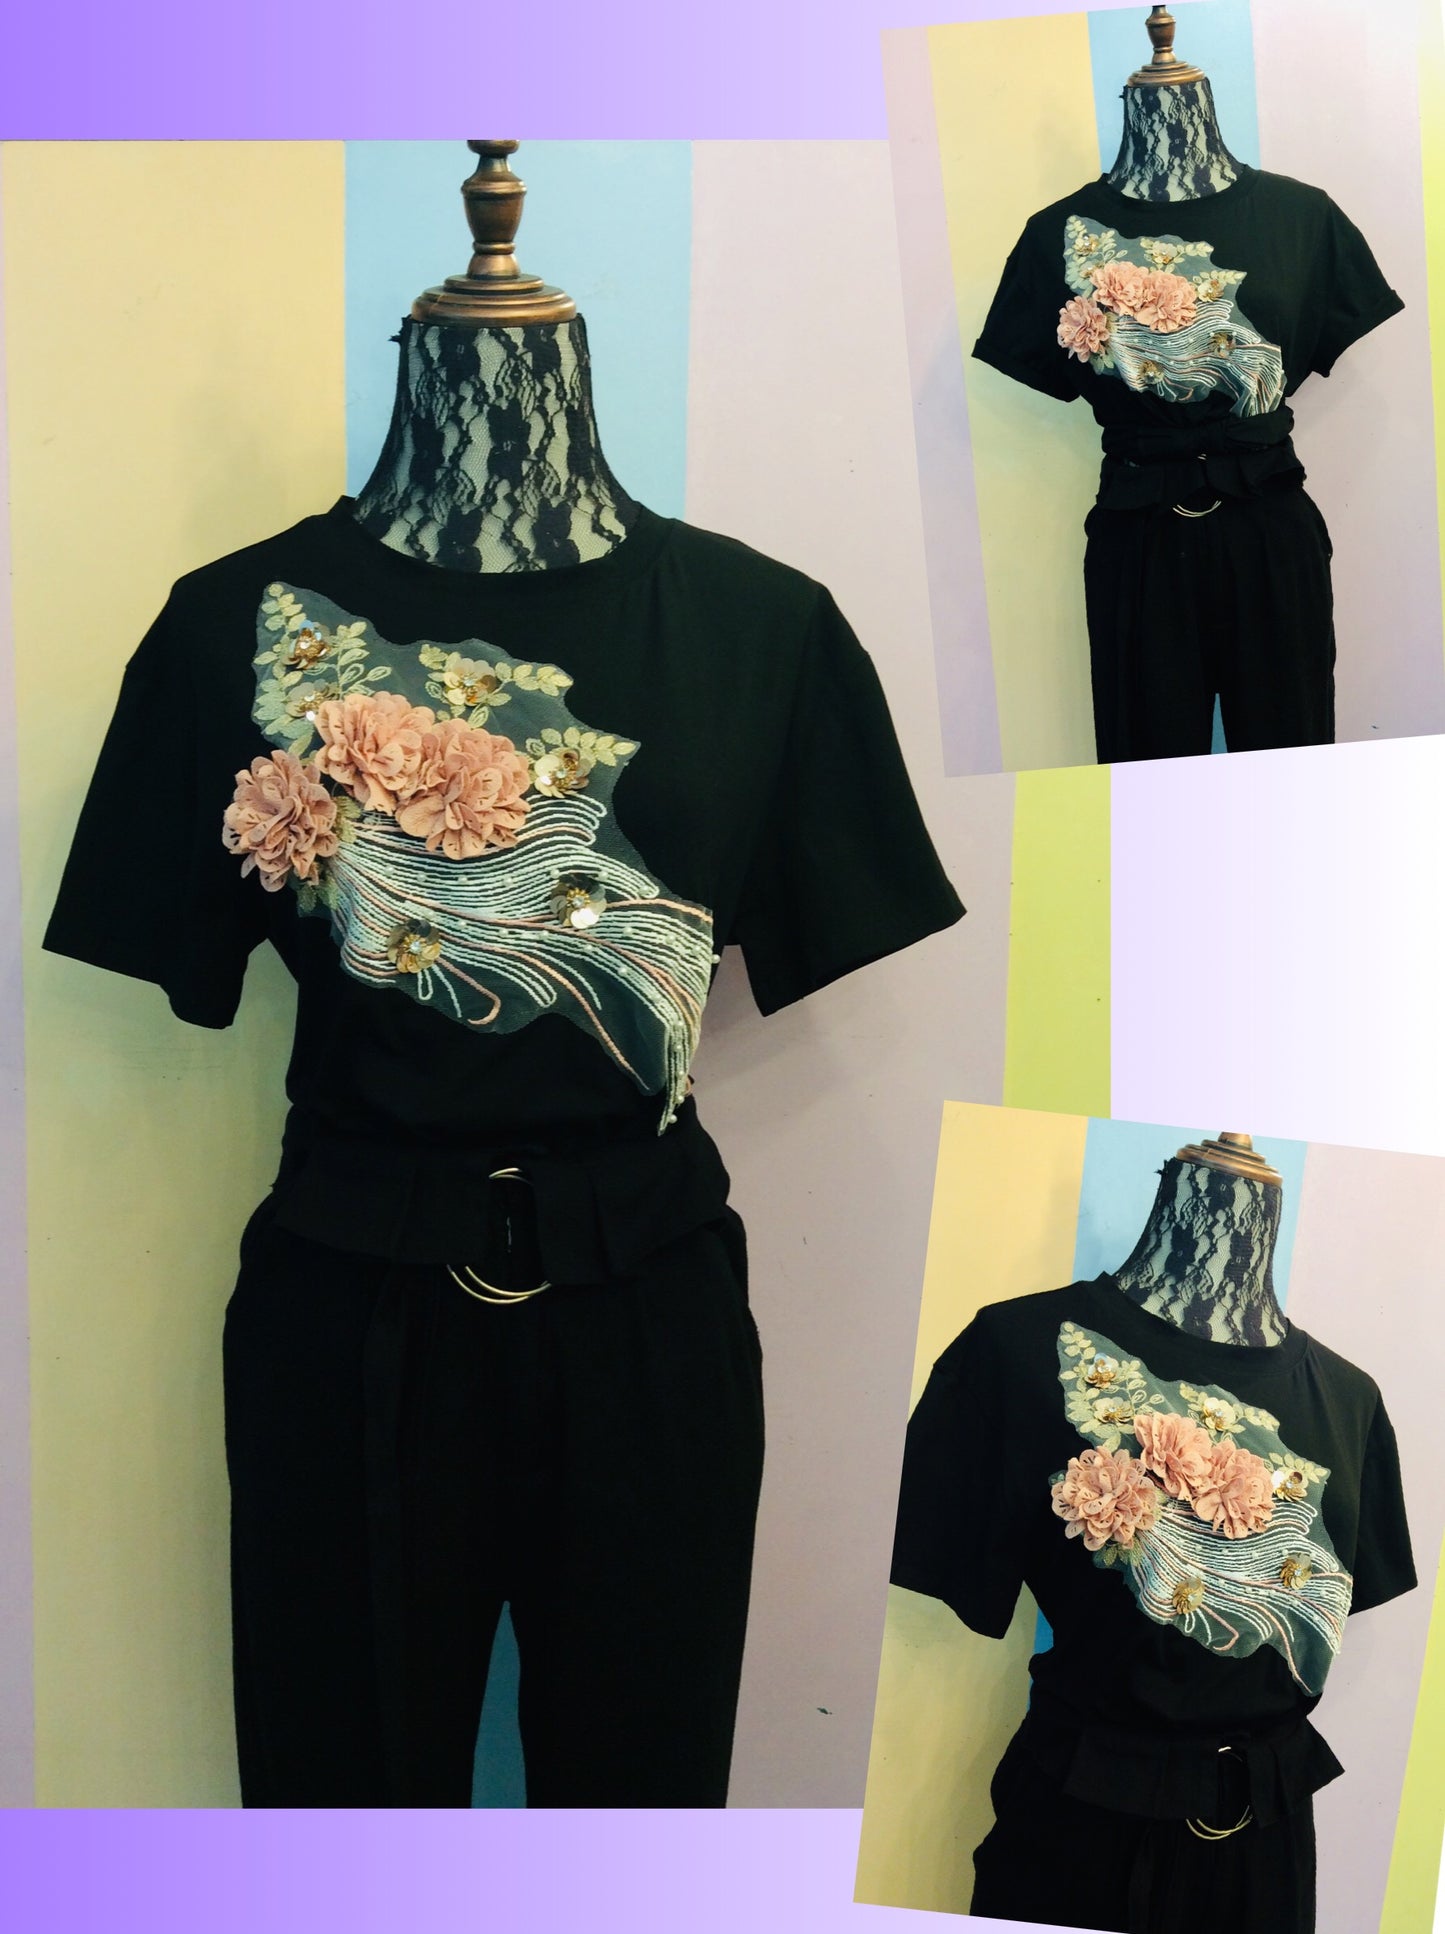 Flower, Sequins and Pearls Tee